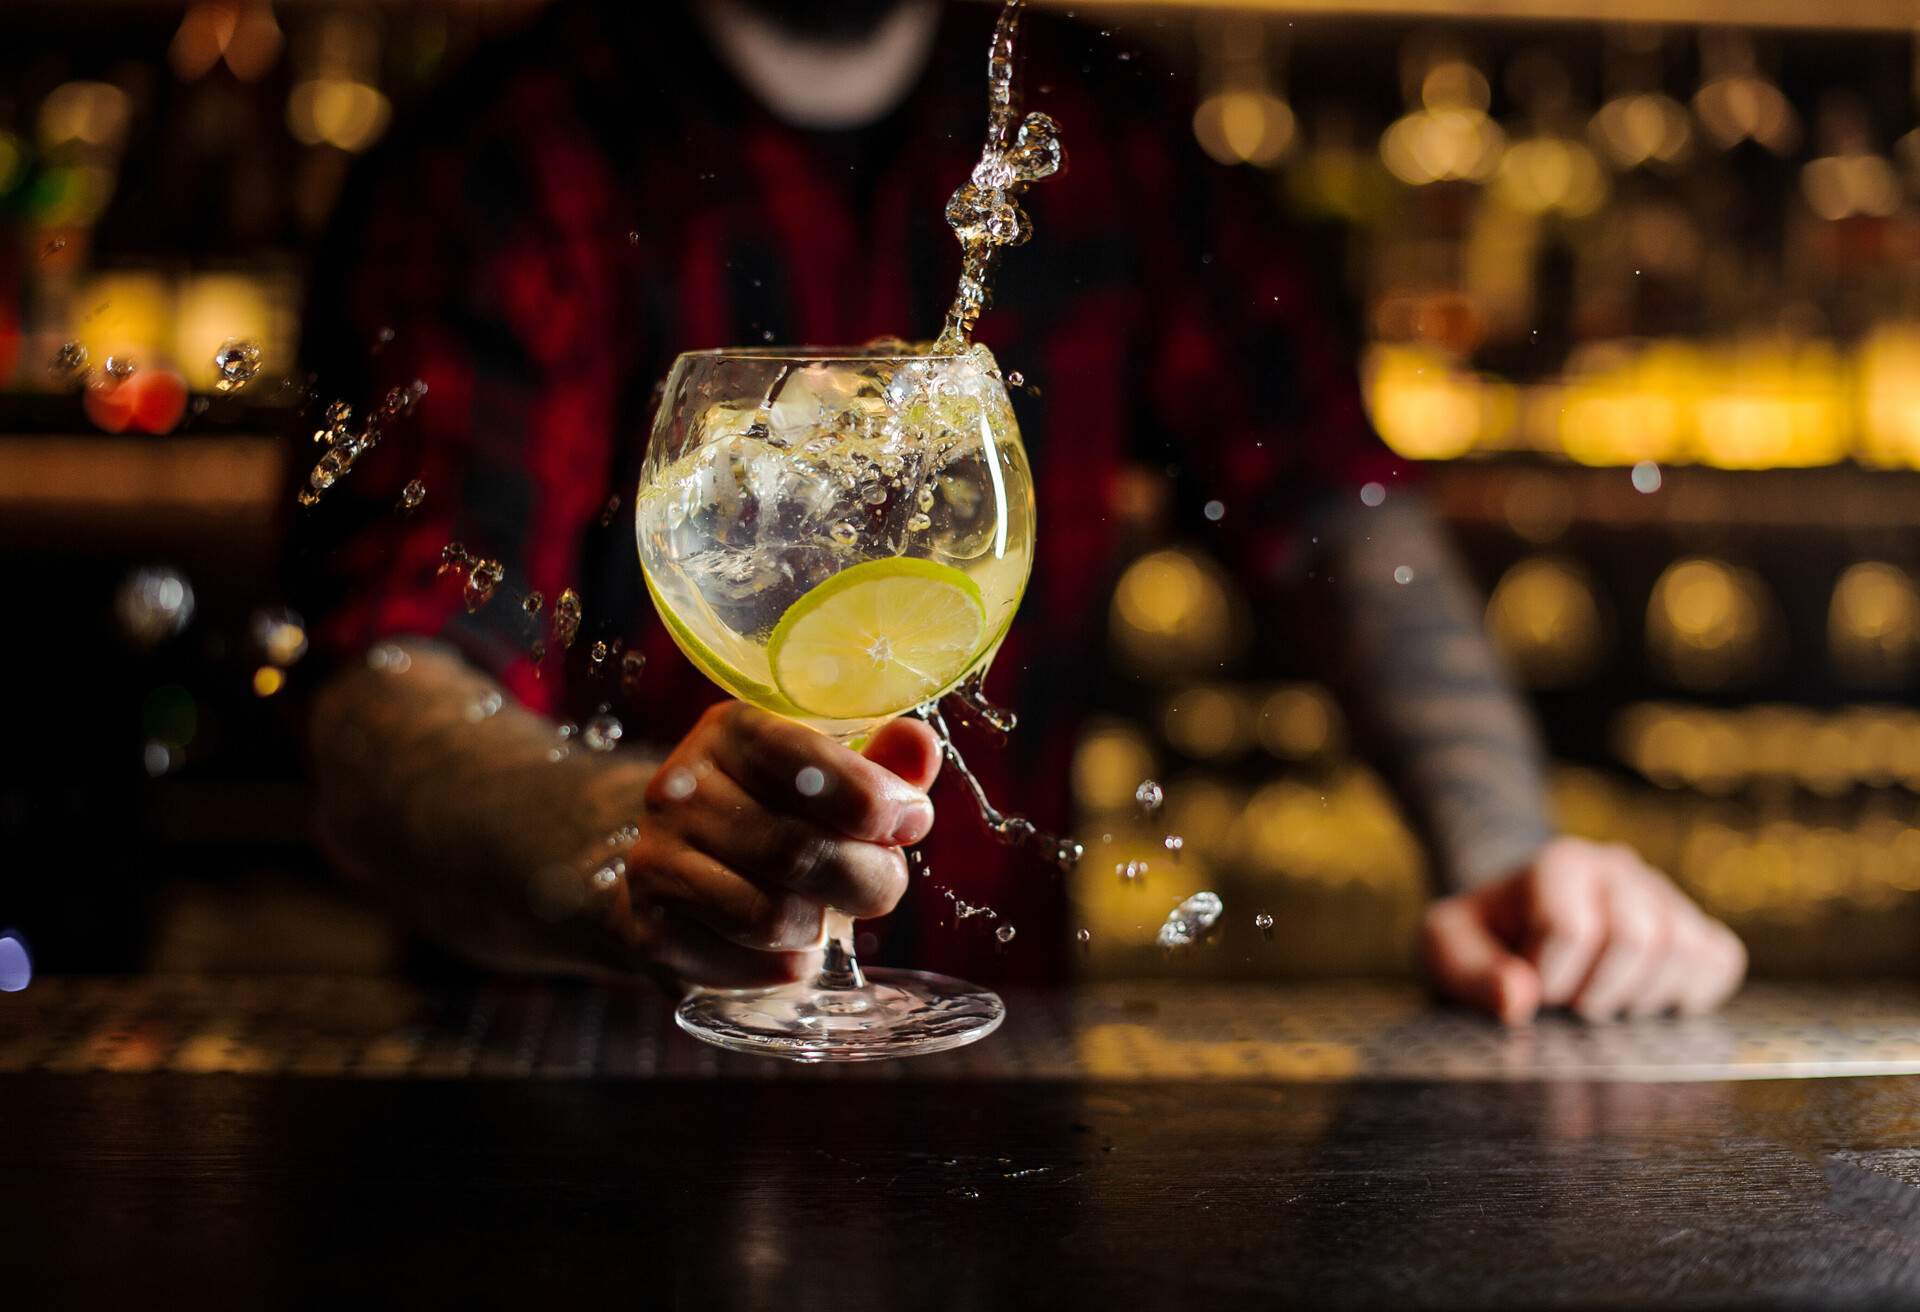 DRINK_COCKTAIL_GIN_TONIC_BAR_BARTENDER_PERSON_HANDS